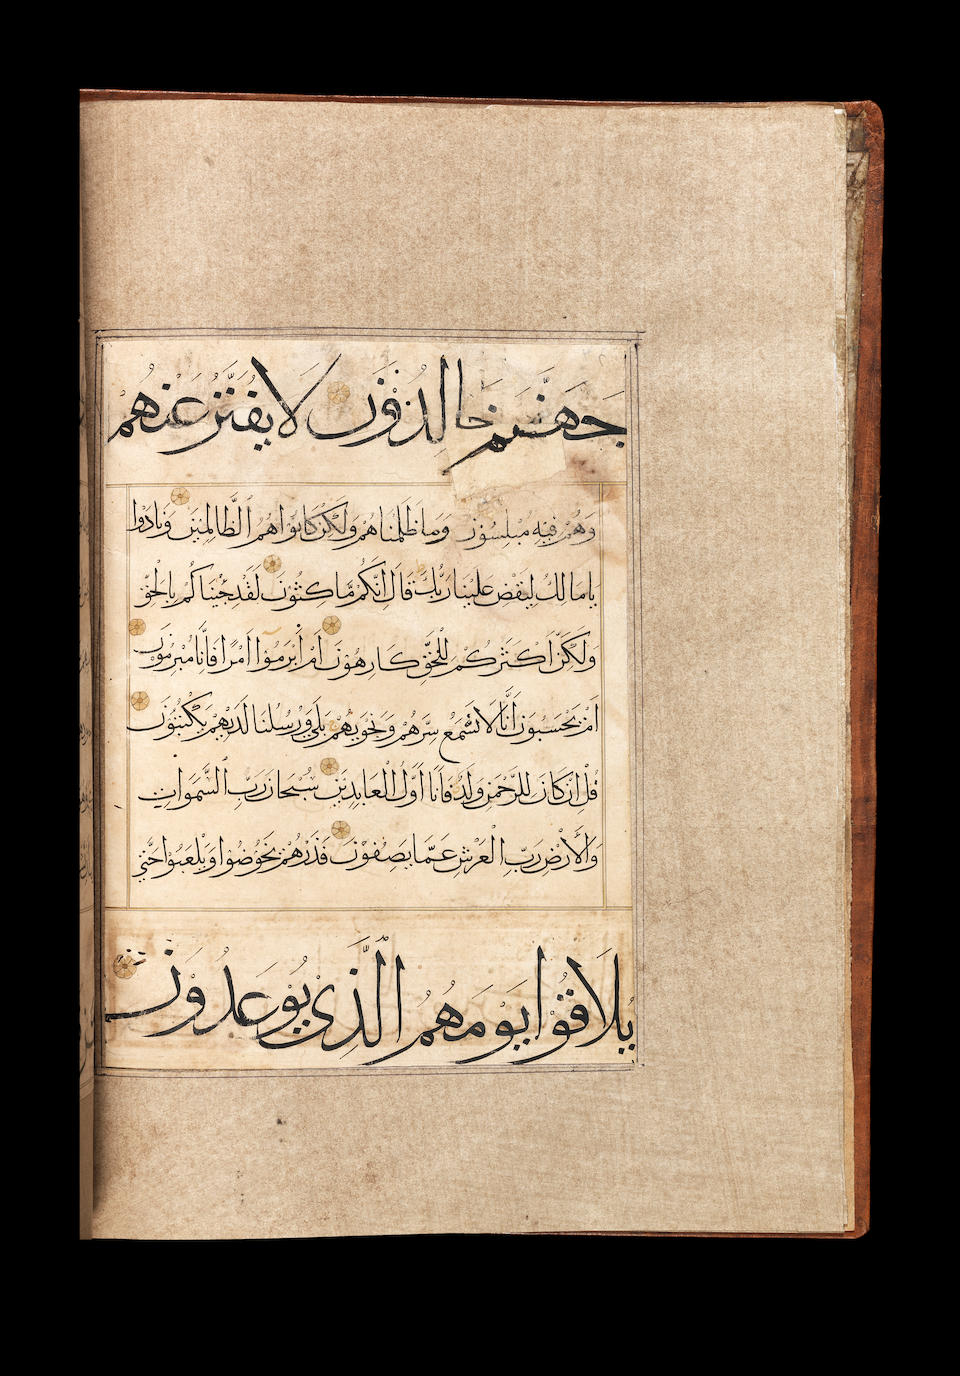 A Qur'an section, including two illuminated headings of sura XLII, al-Shura, Consultation (also known as 'Ain sin qaf), and sura XLIV, al-Dukkan, Smoke or Mist probably Ottoman Turkey, 15th Century